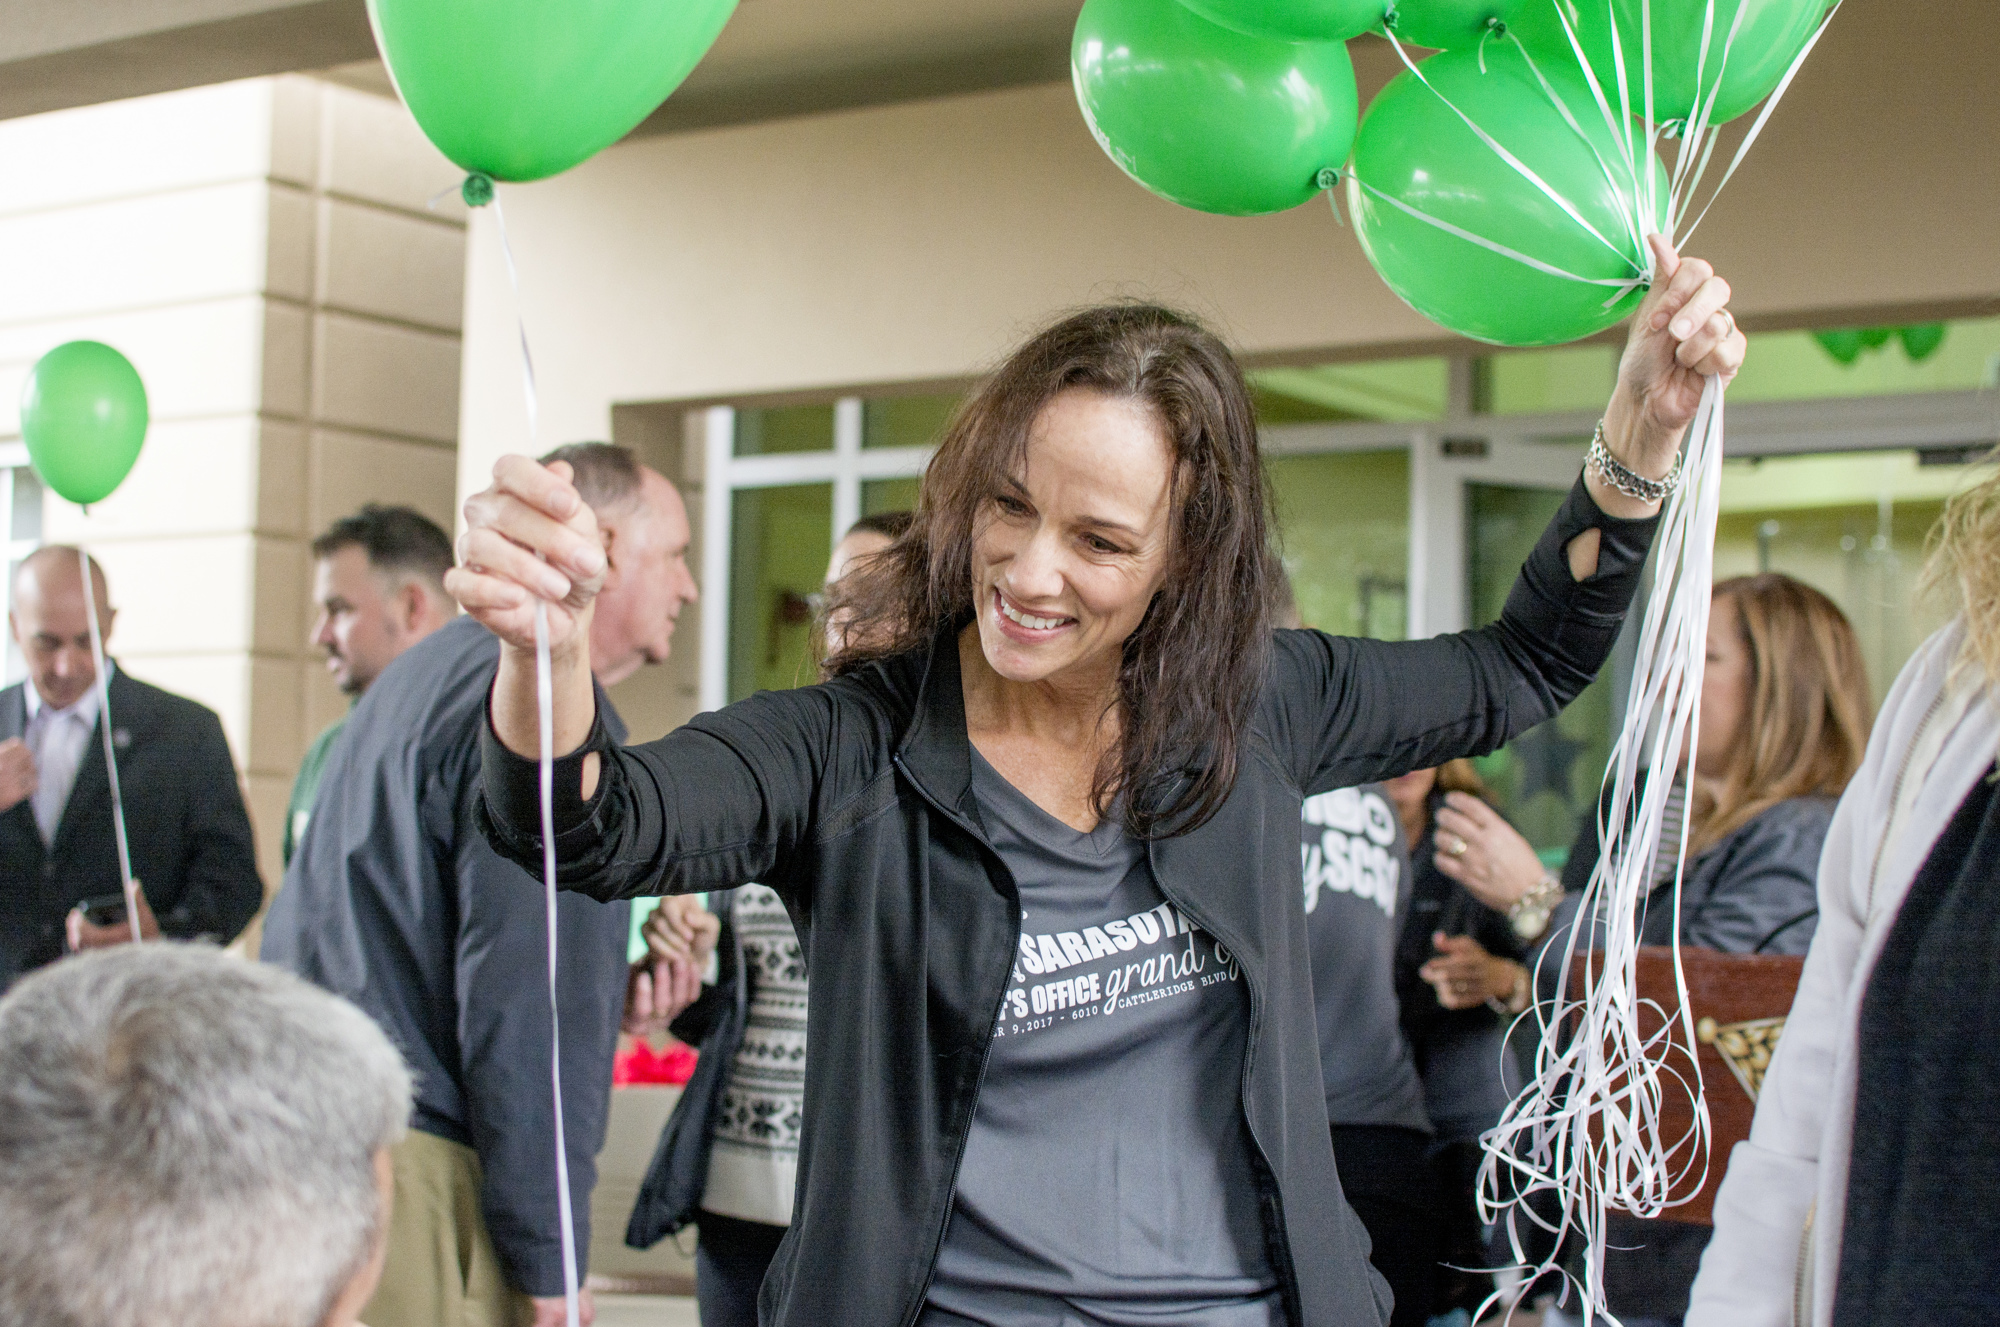 Penny Johanesen passes out balloons during the ribbon cutting celebration.